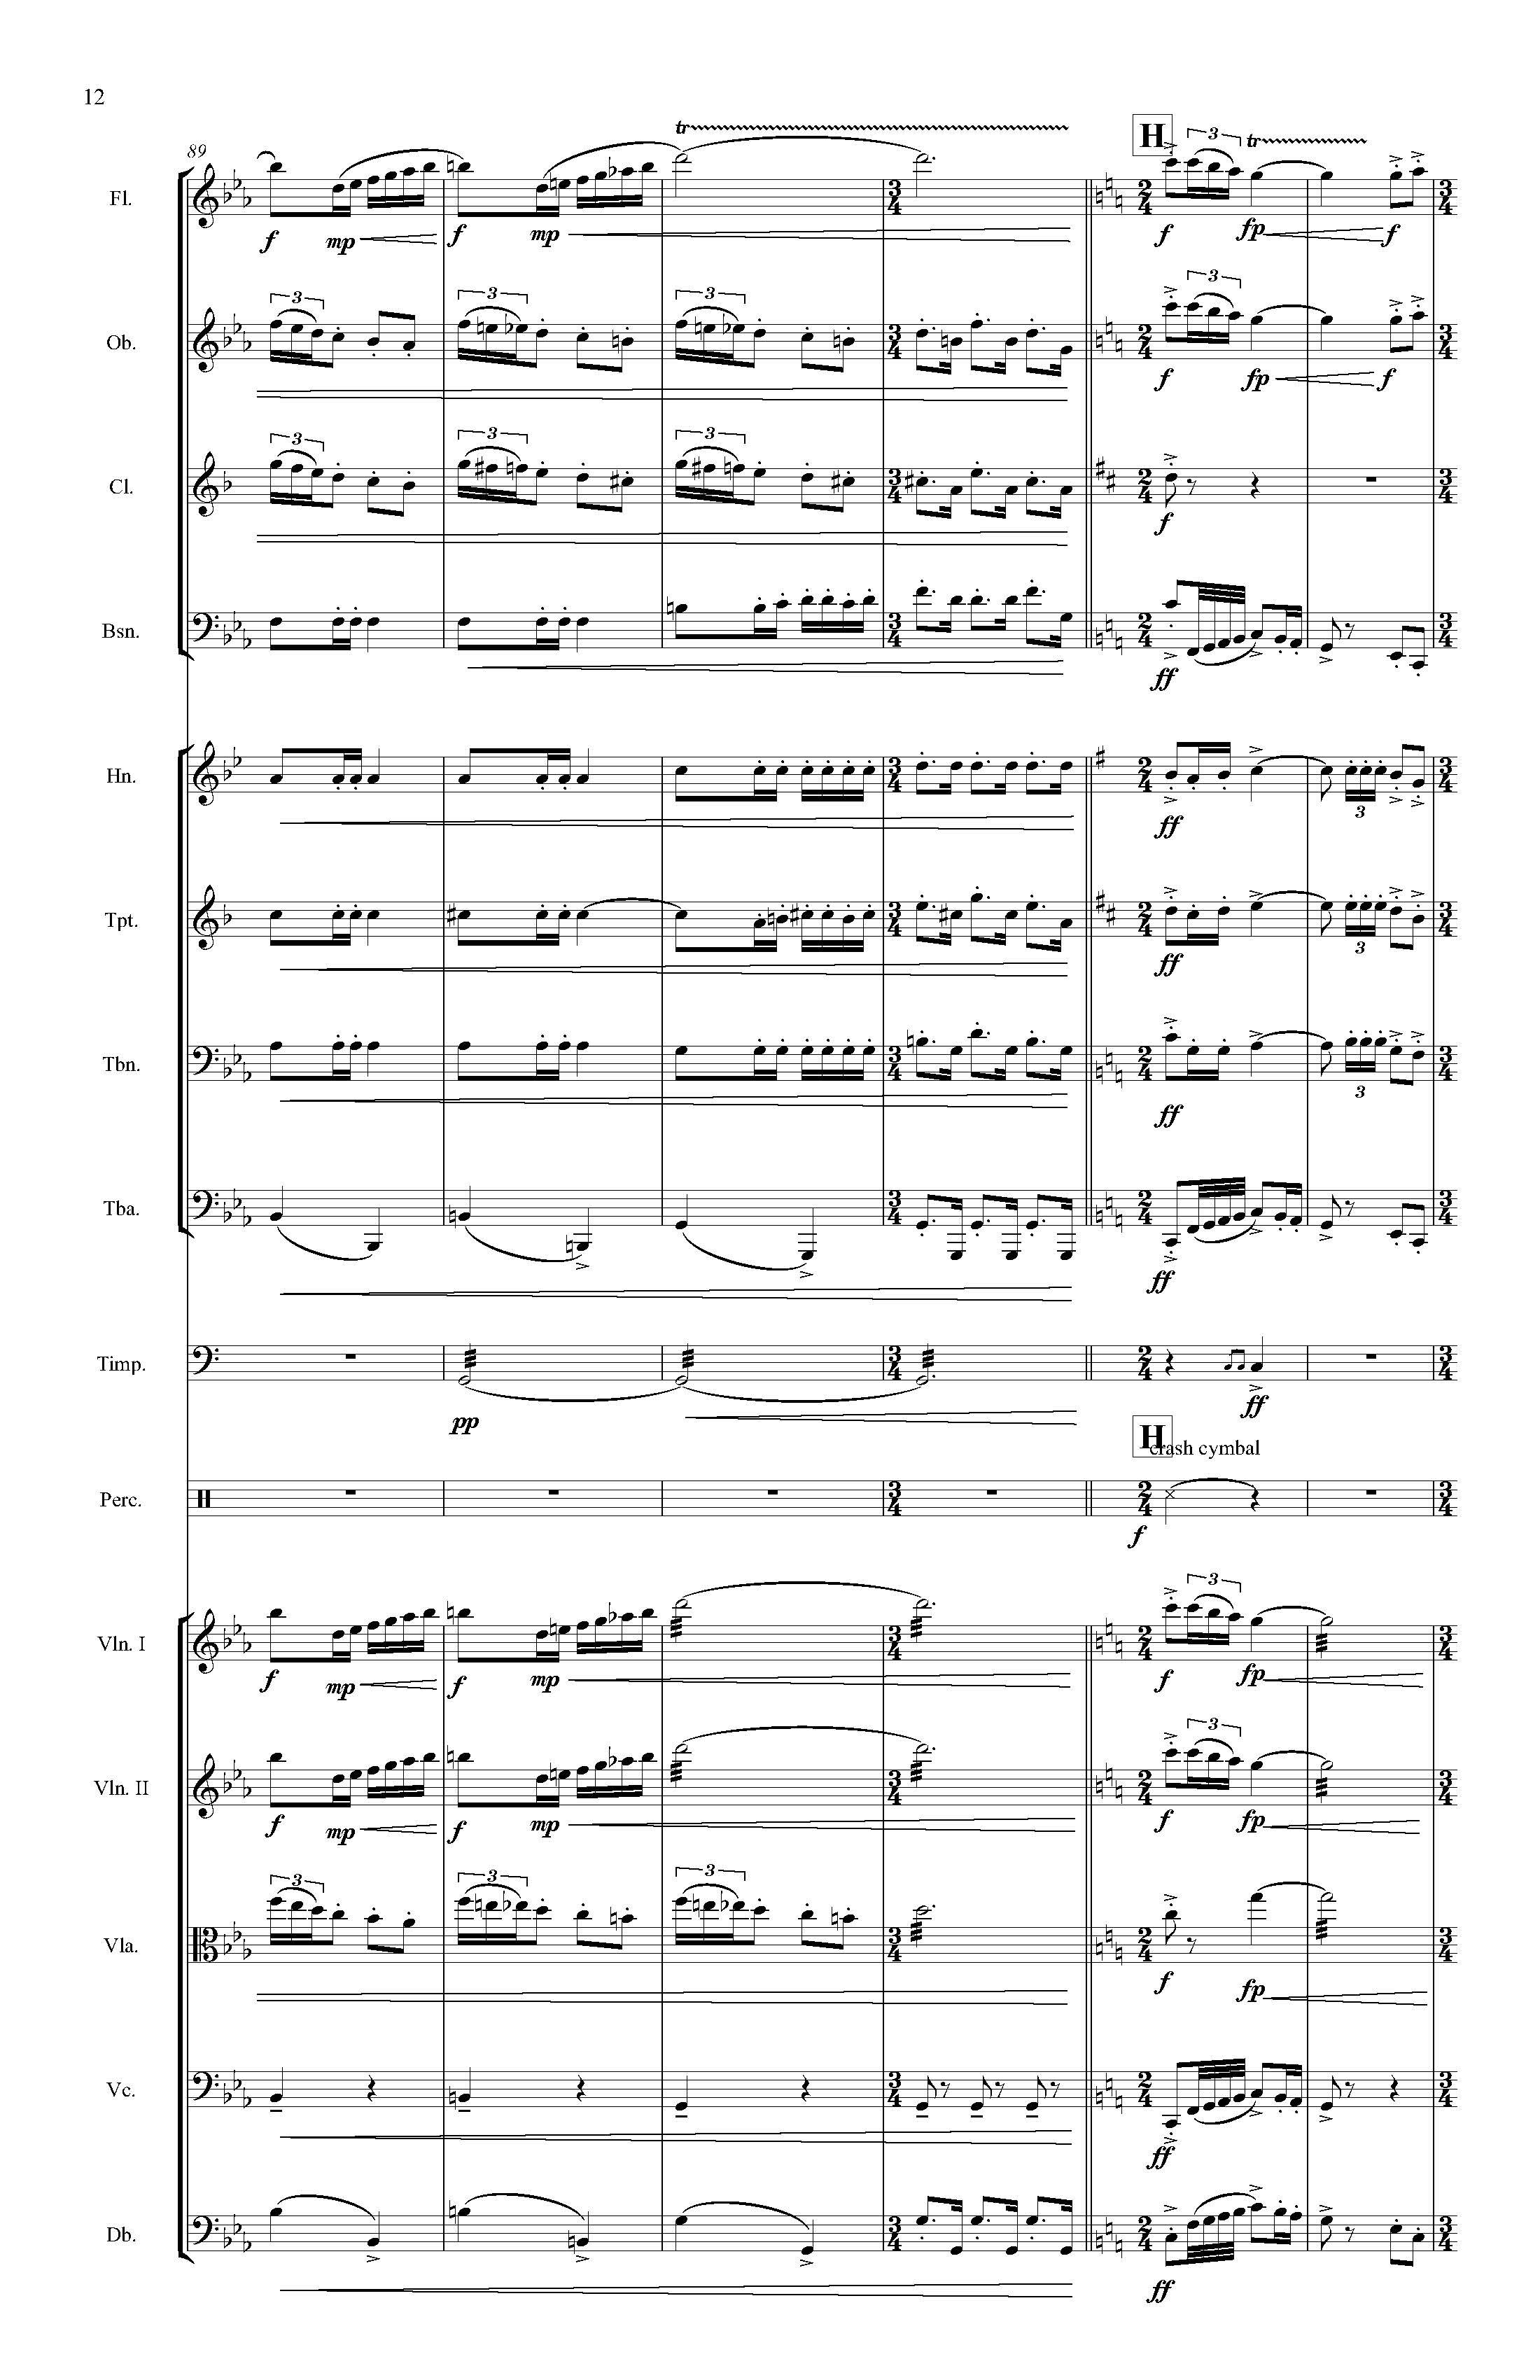 Fantasy on a French Carol - Complete Score_Page_16.jpg